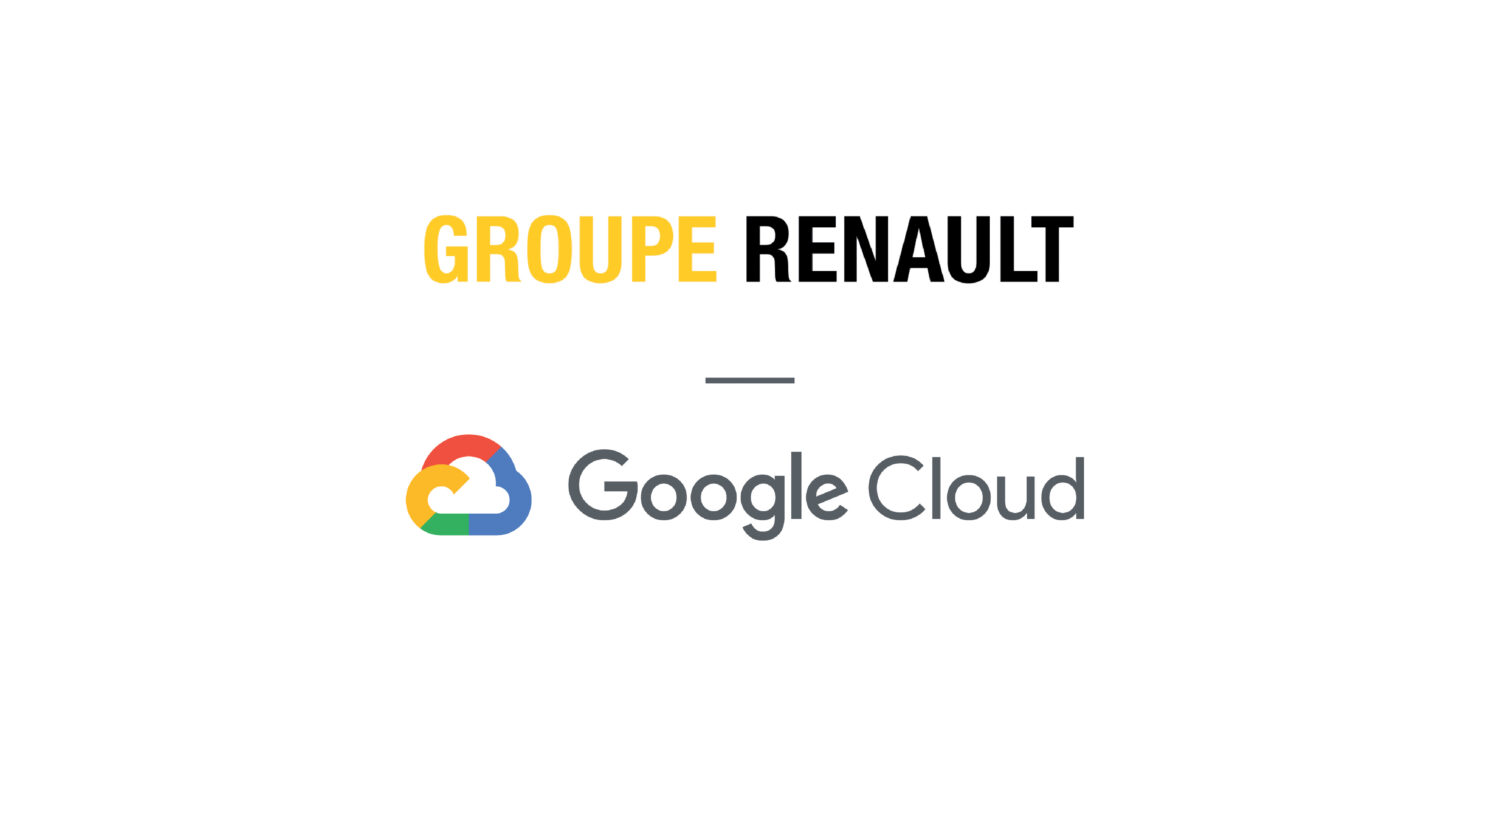 2020 - INDUSTRY 4.0 : GROUPE RENAULT AND GOOGLE CLOUD PARTNERSHIP